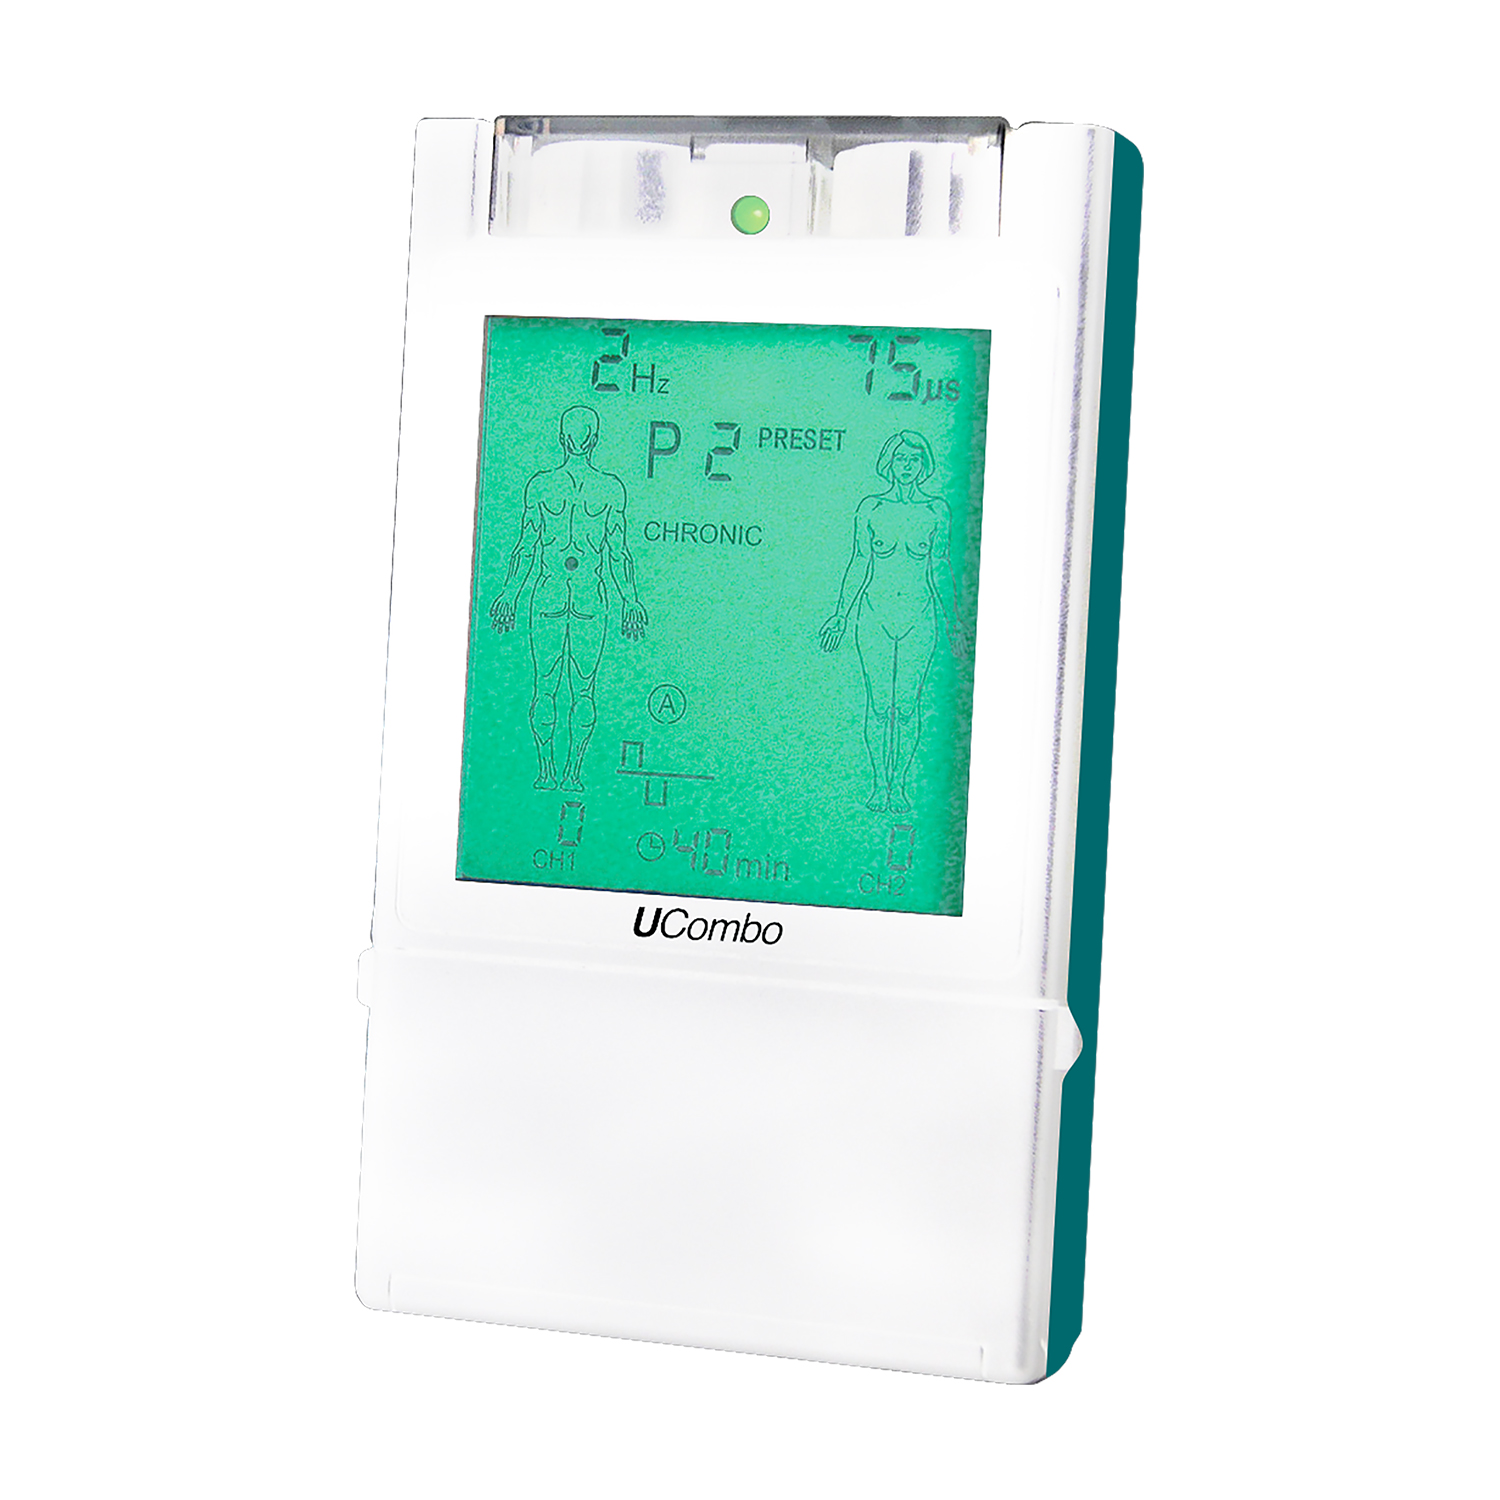 Digital 5-Mode TENS Unit for ED by ProMed PM365